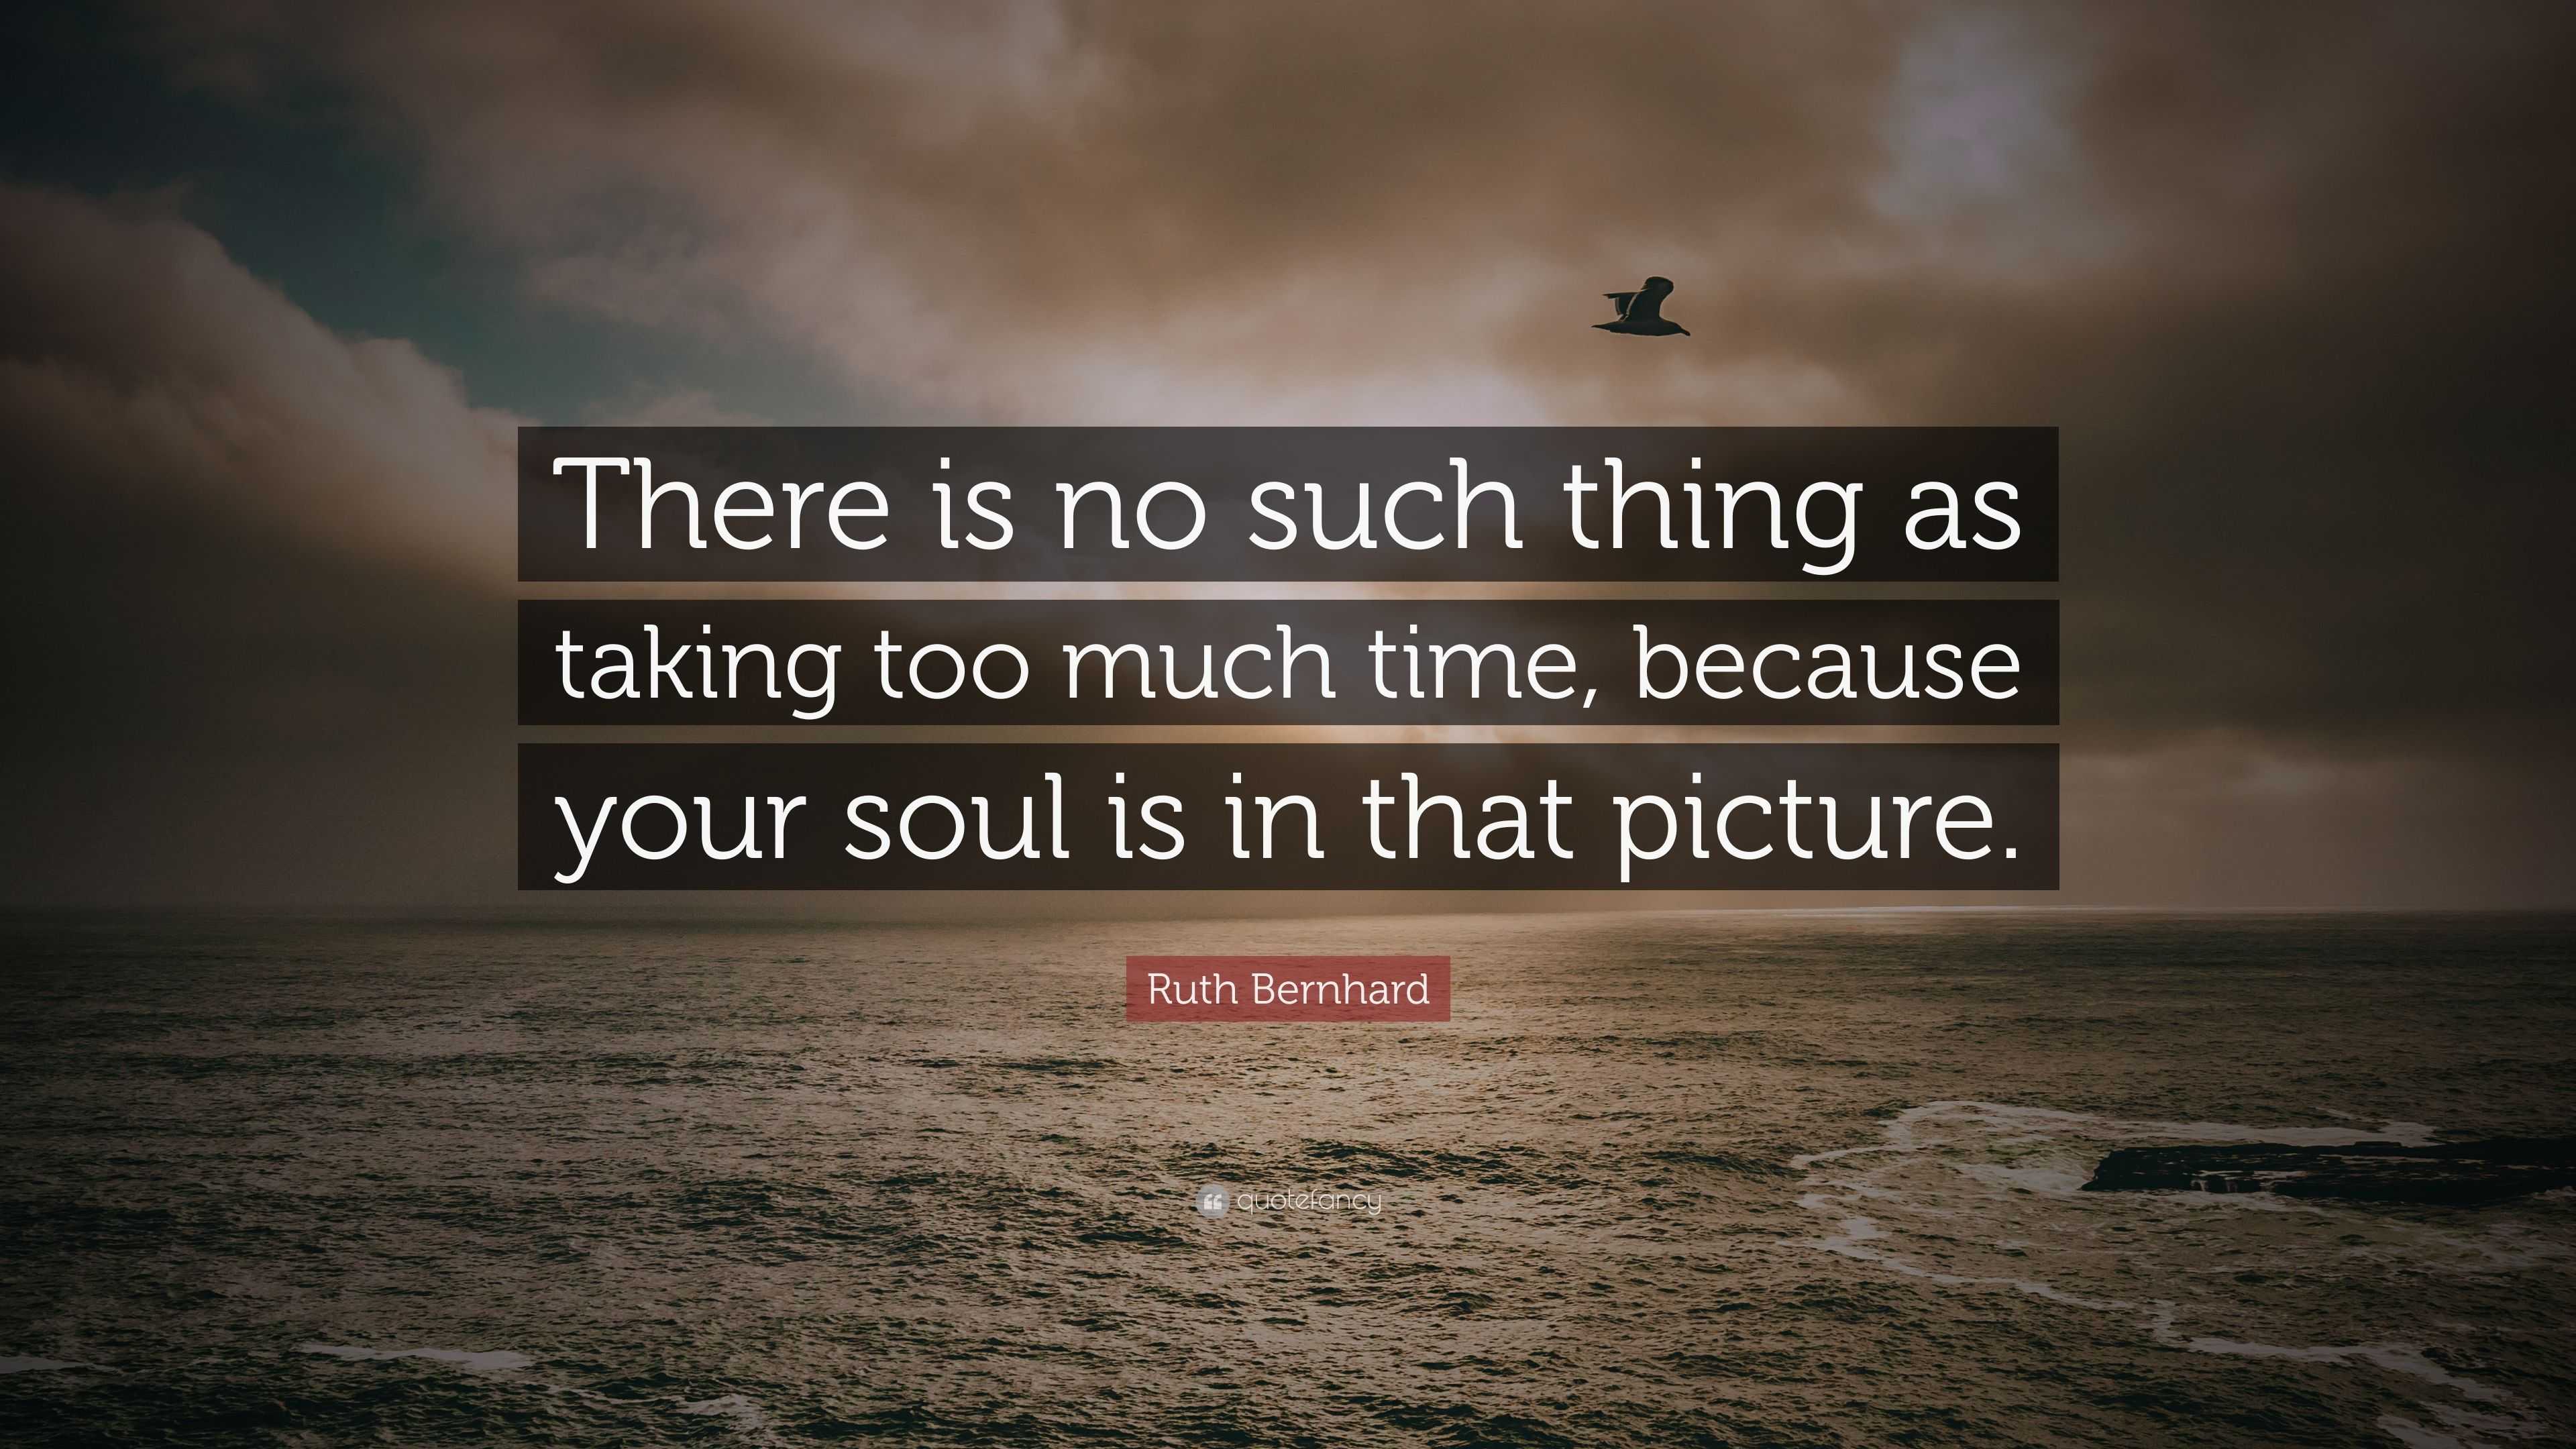 Ruth Bernhard Quote: “There is no such thing as taking too much time ...